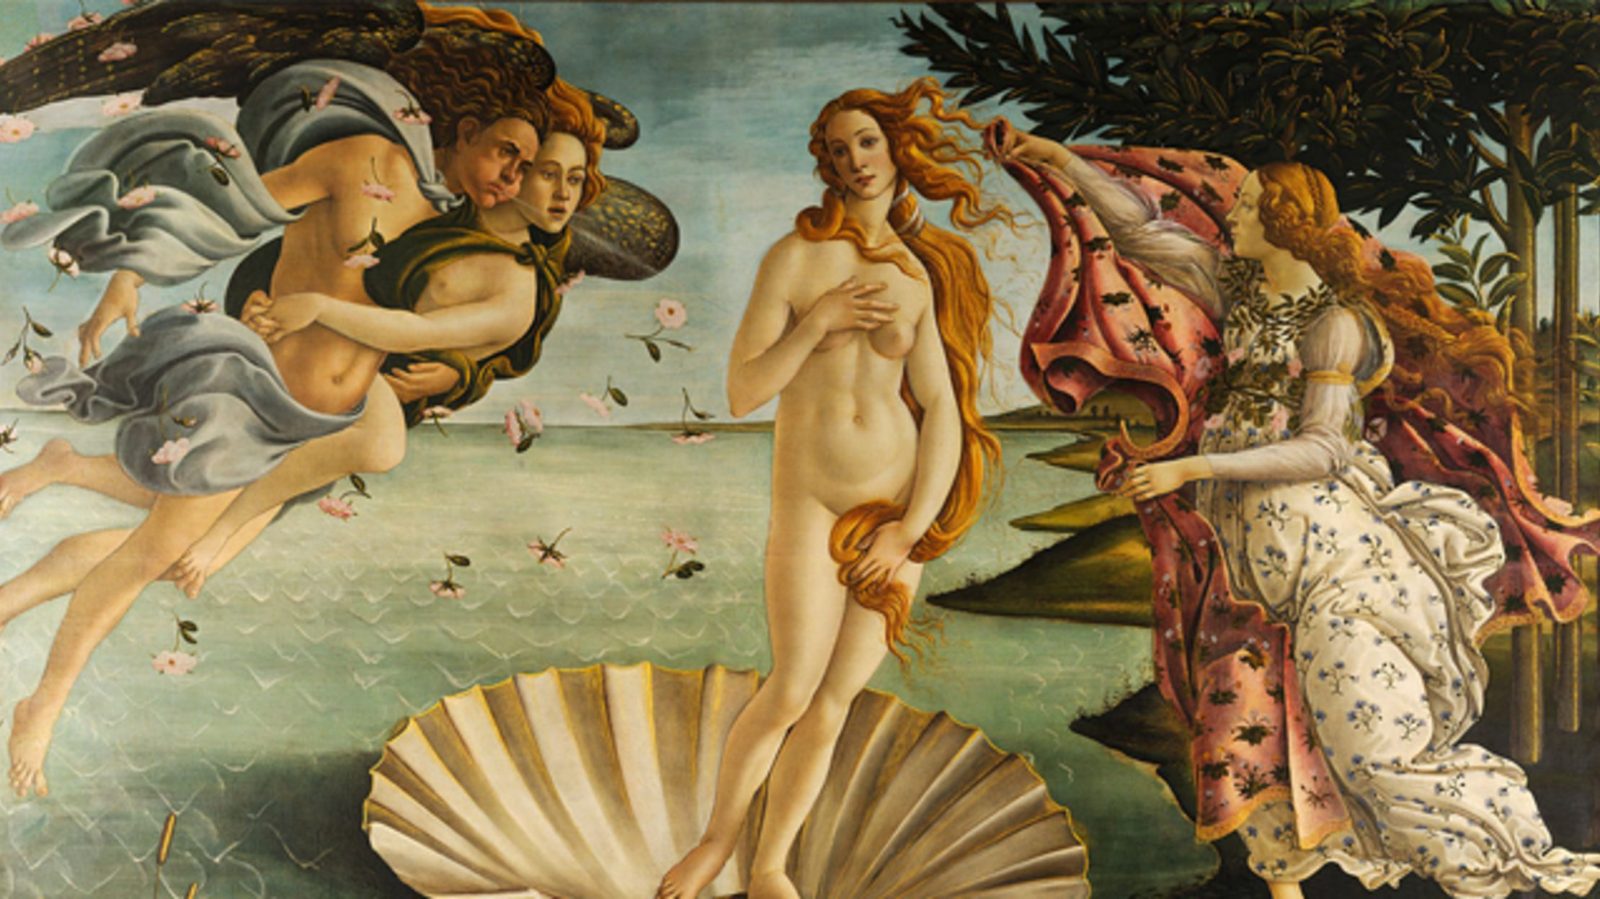 Can You Match These Famous Paintings to Their Legendary Creators? the Birth of Venus